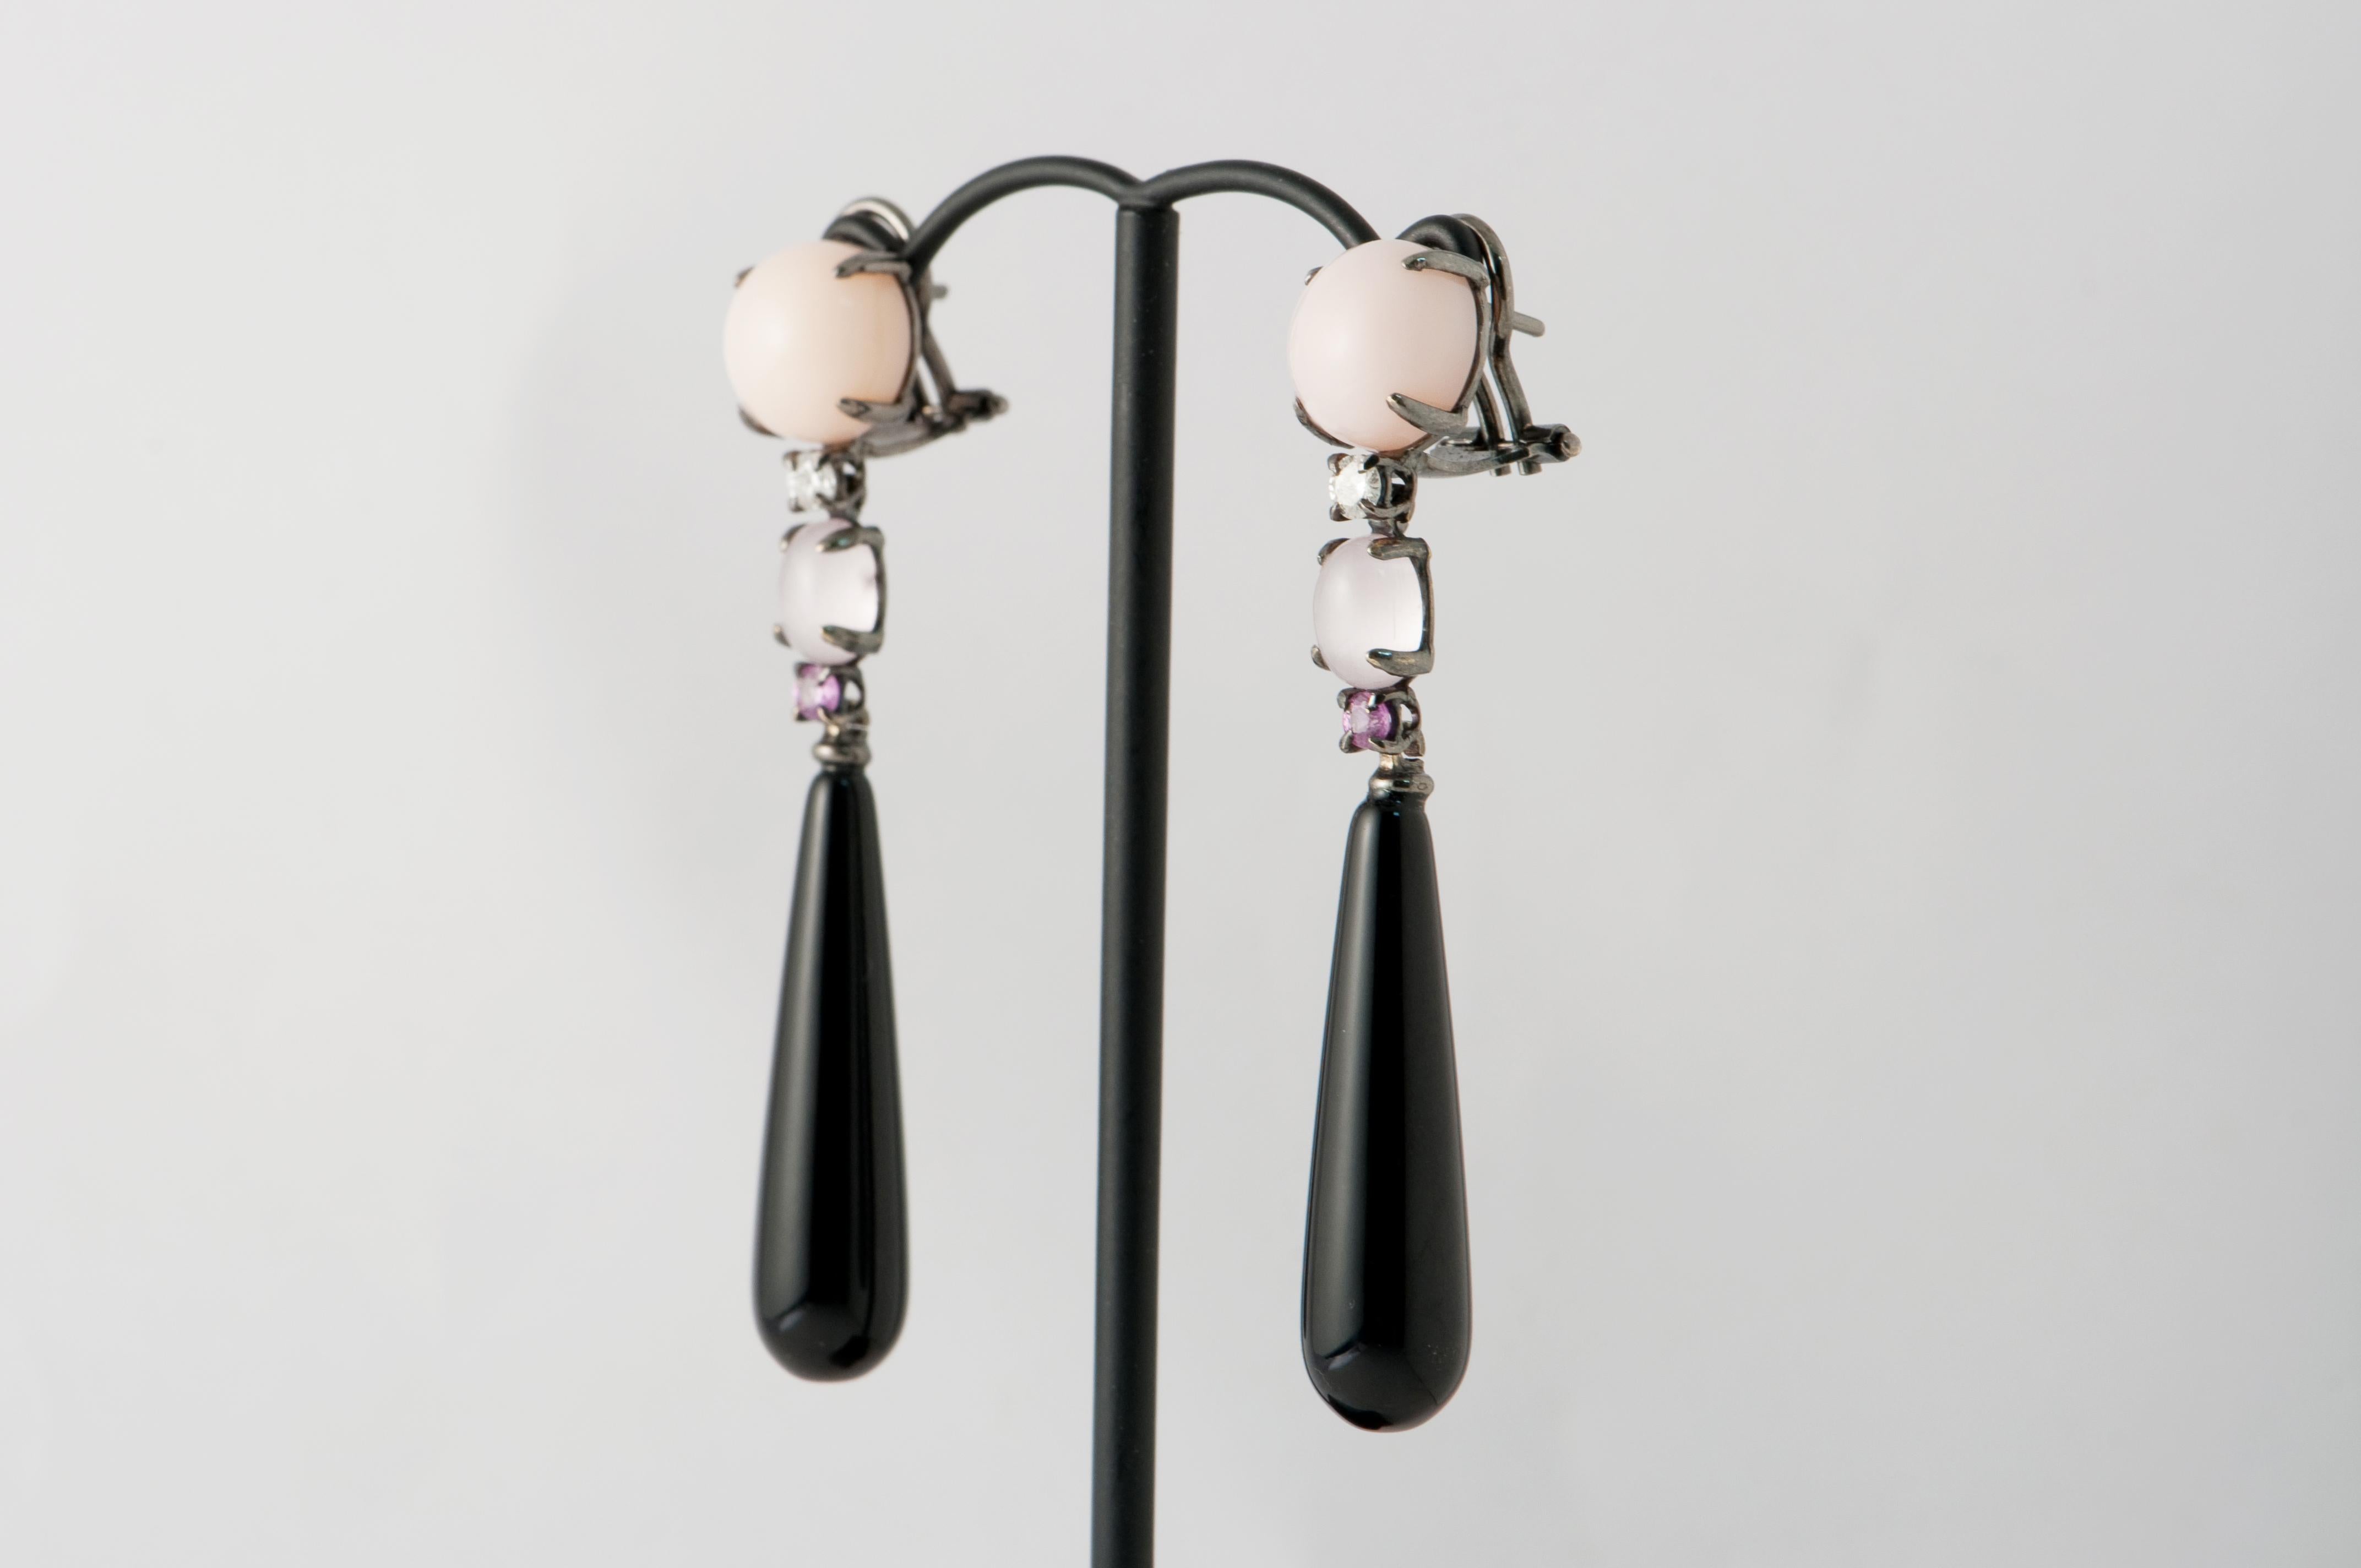 Discover this Opal, Agate, Coral
White Diamonds 0.014 ct
Black Gold 18 Carat Chandelier Earrings.
